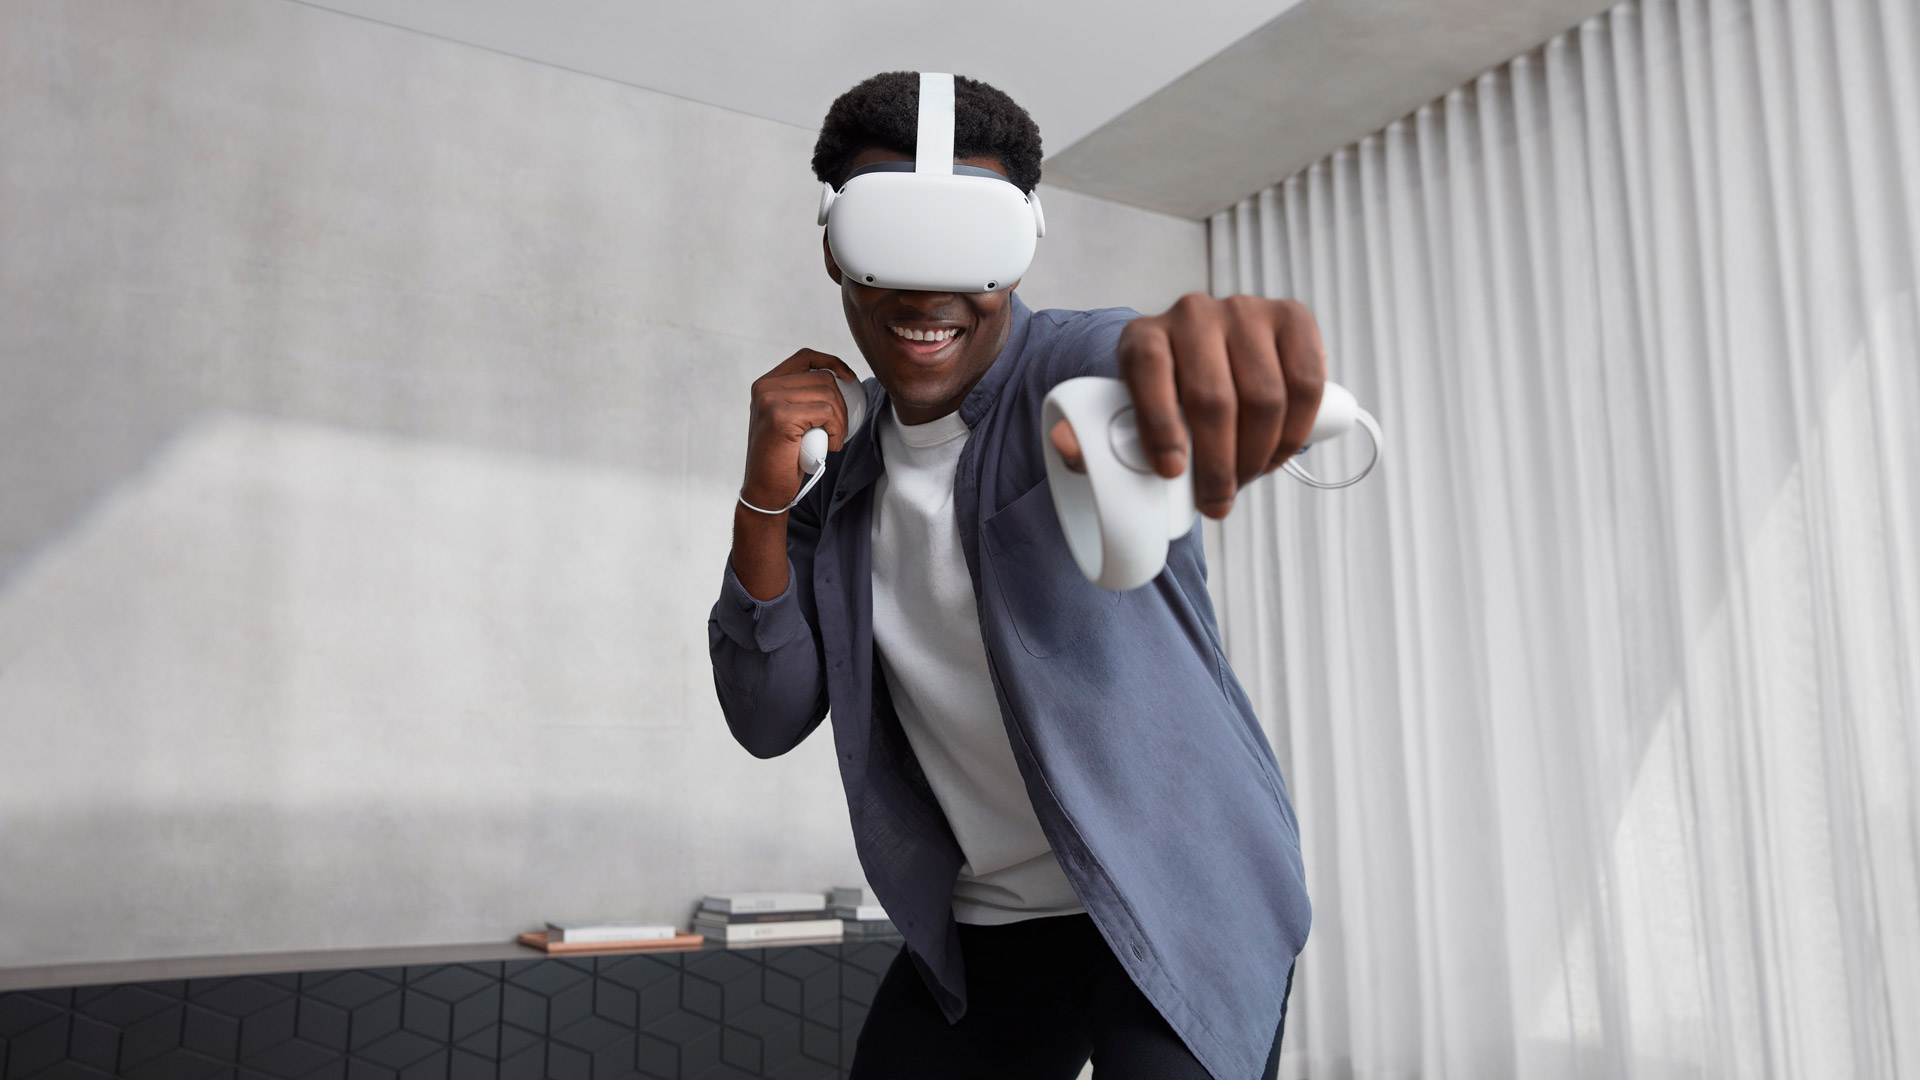 oculus quest 2 included games